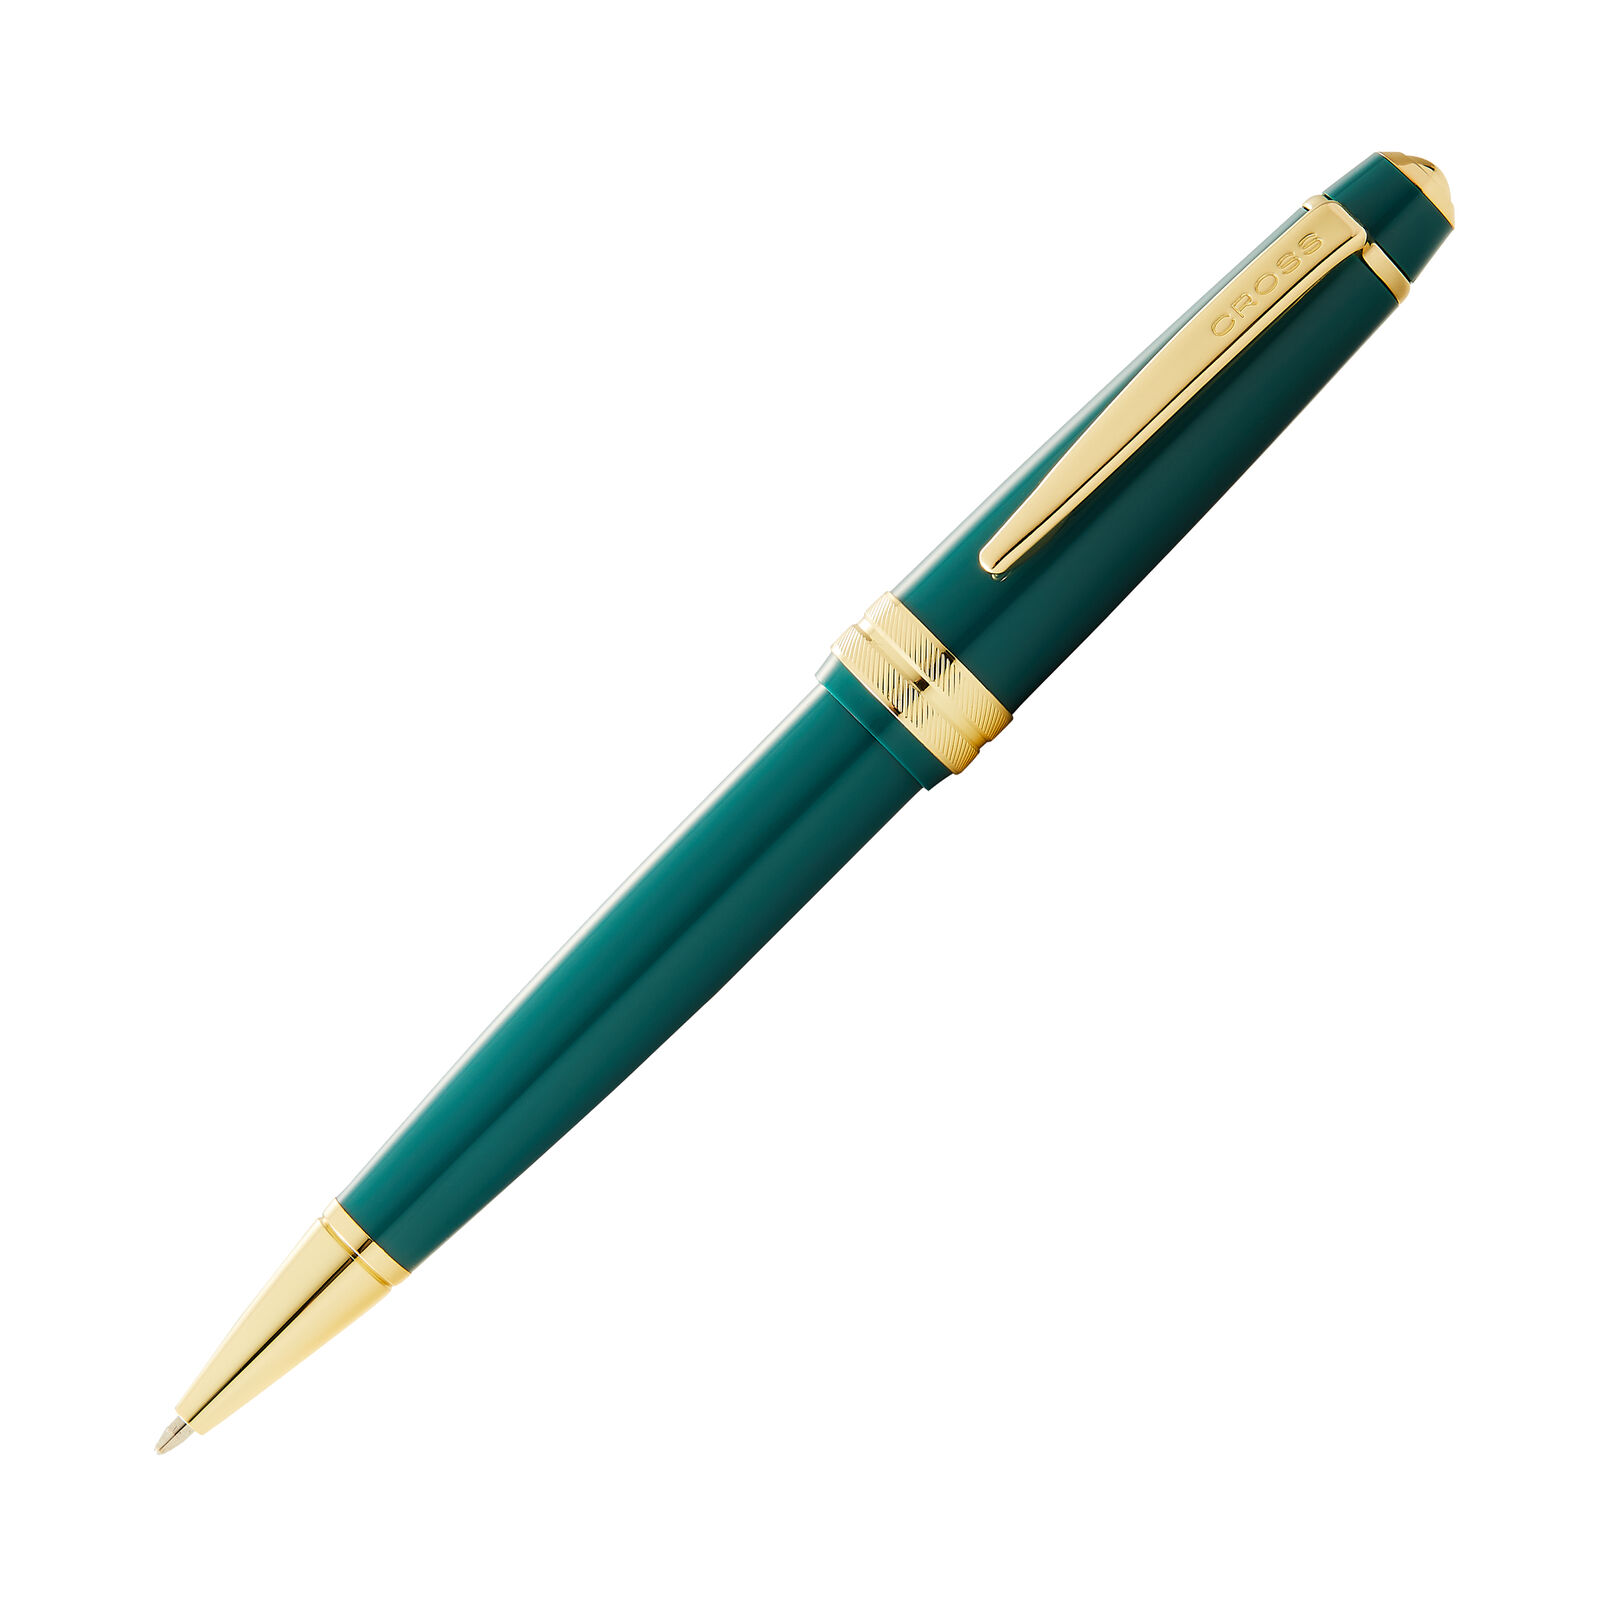 Cross Bailey Light Ballpoint Pen in Glossy Green Resin with Gold Trim - NEW